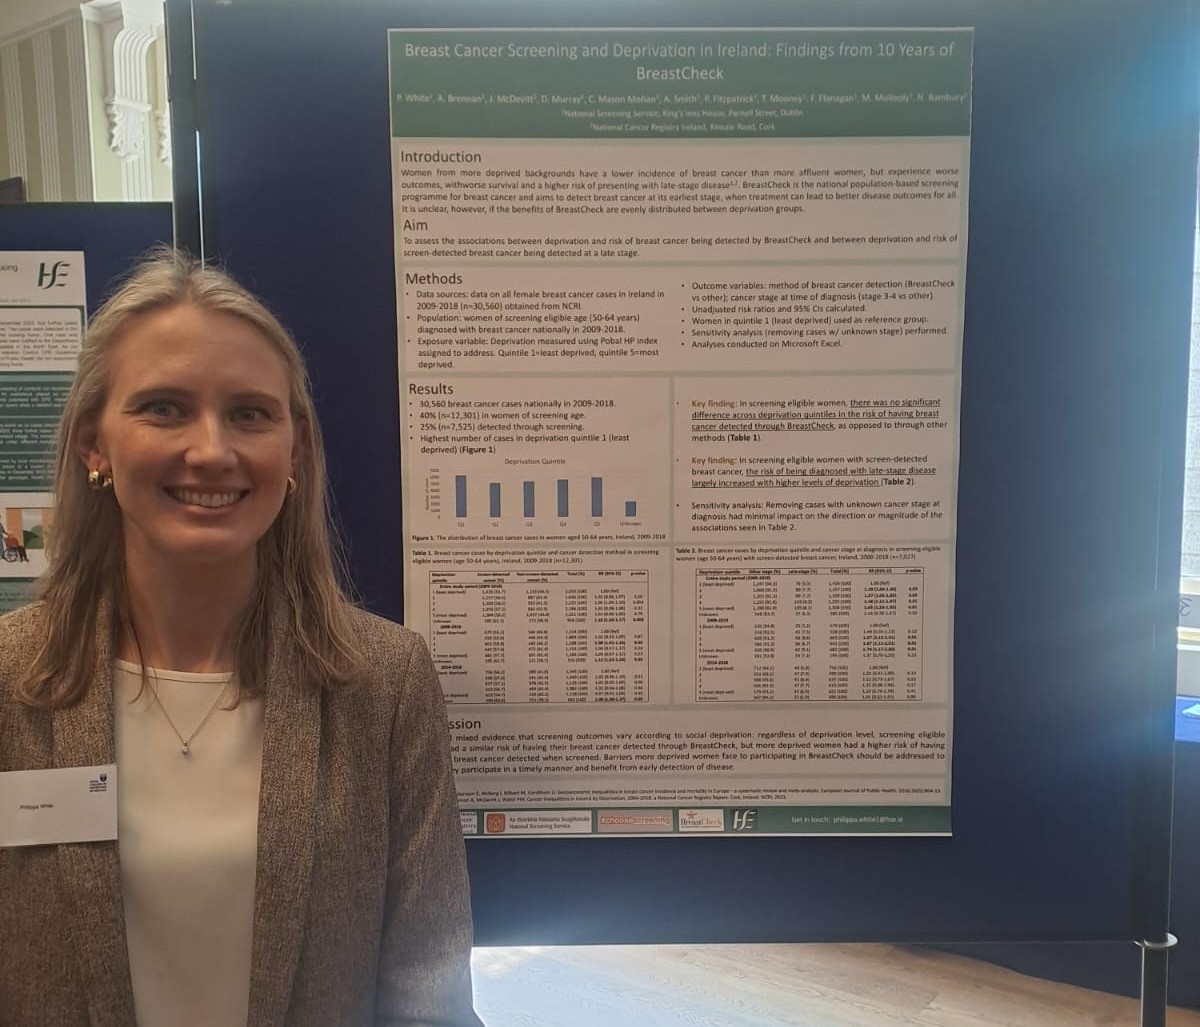 Dr Philippa White, Specialist Registrar in Public Health Medicine, presenting at @RCPI_news conference this week on the associations between deprivation & risk of #breastcancer being detected by #BreastCheck and risk of screen-detected breast cancer being detected at a late stage